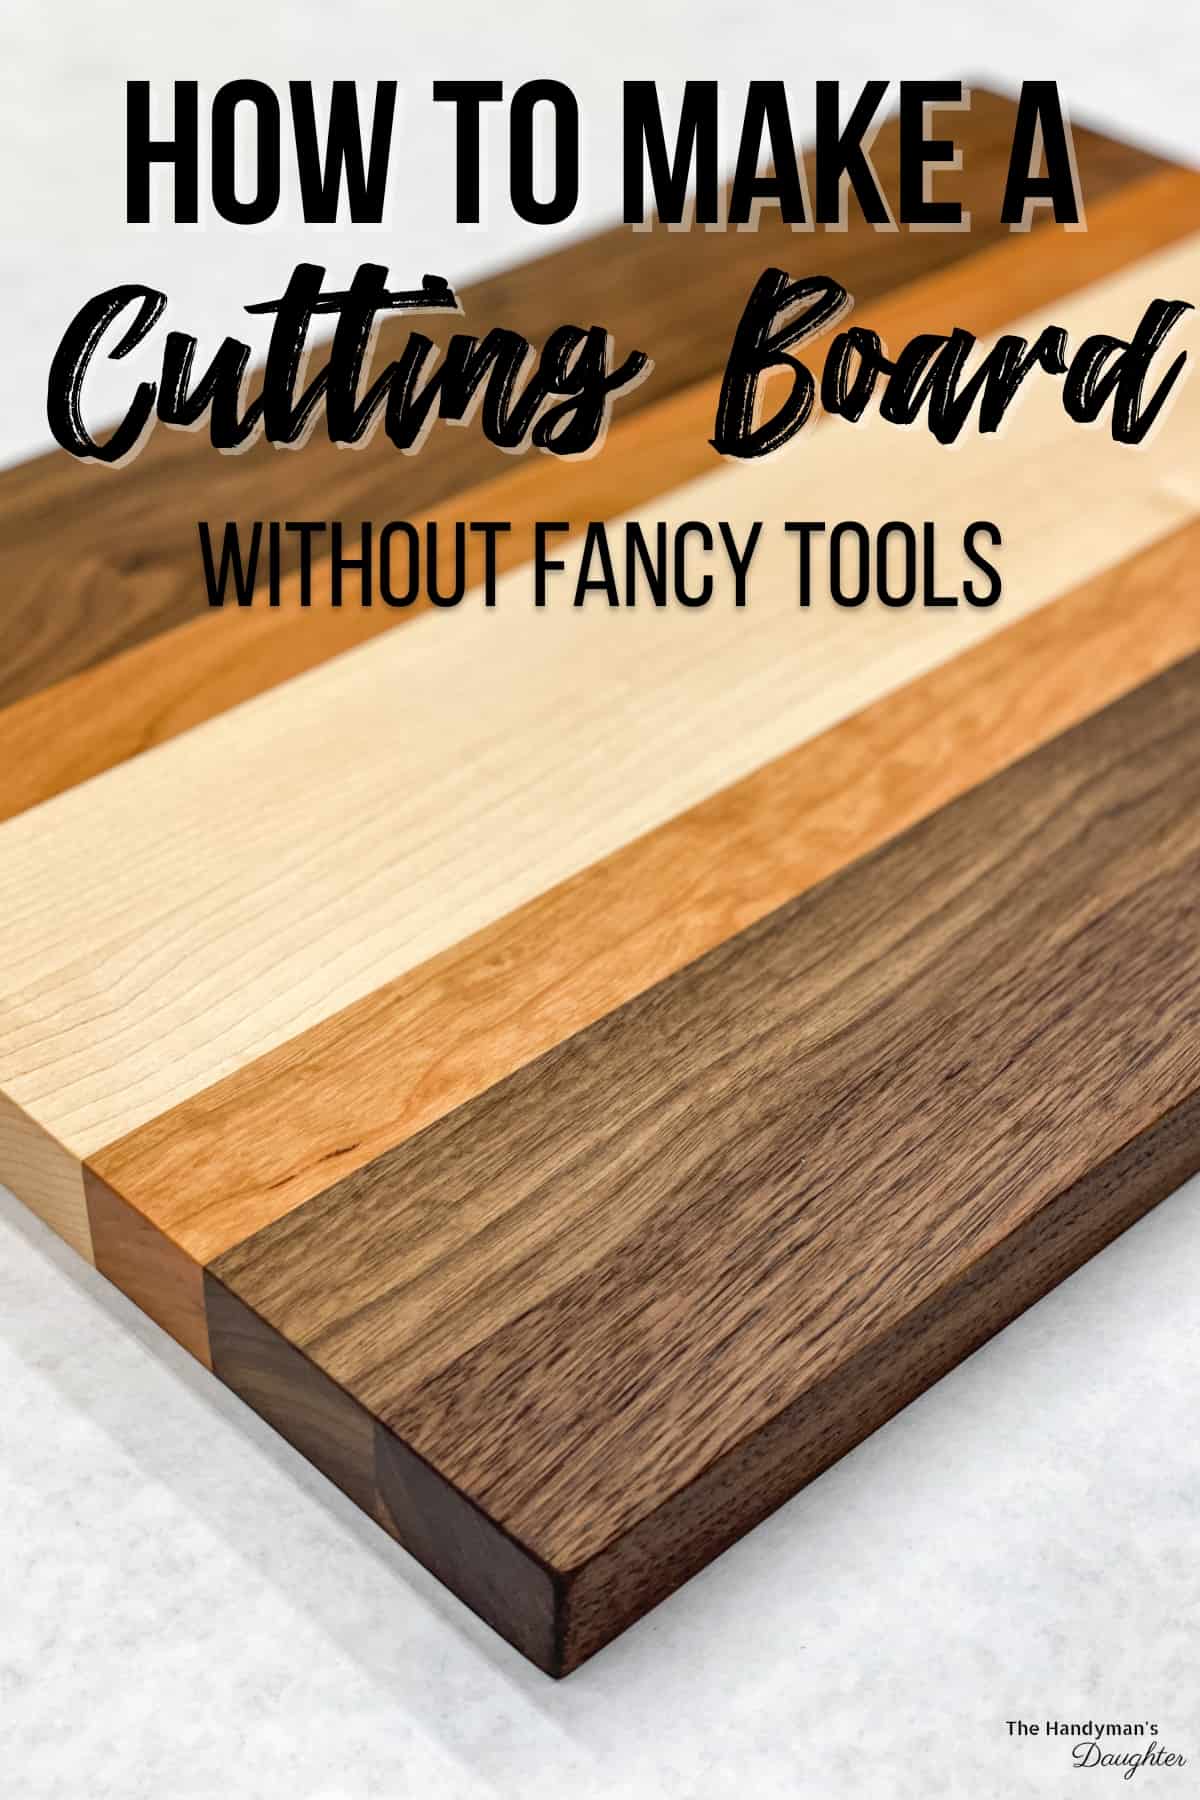 3 Ways to Choose a Cutting Board - wikiHow